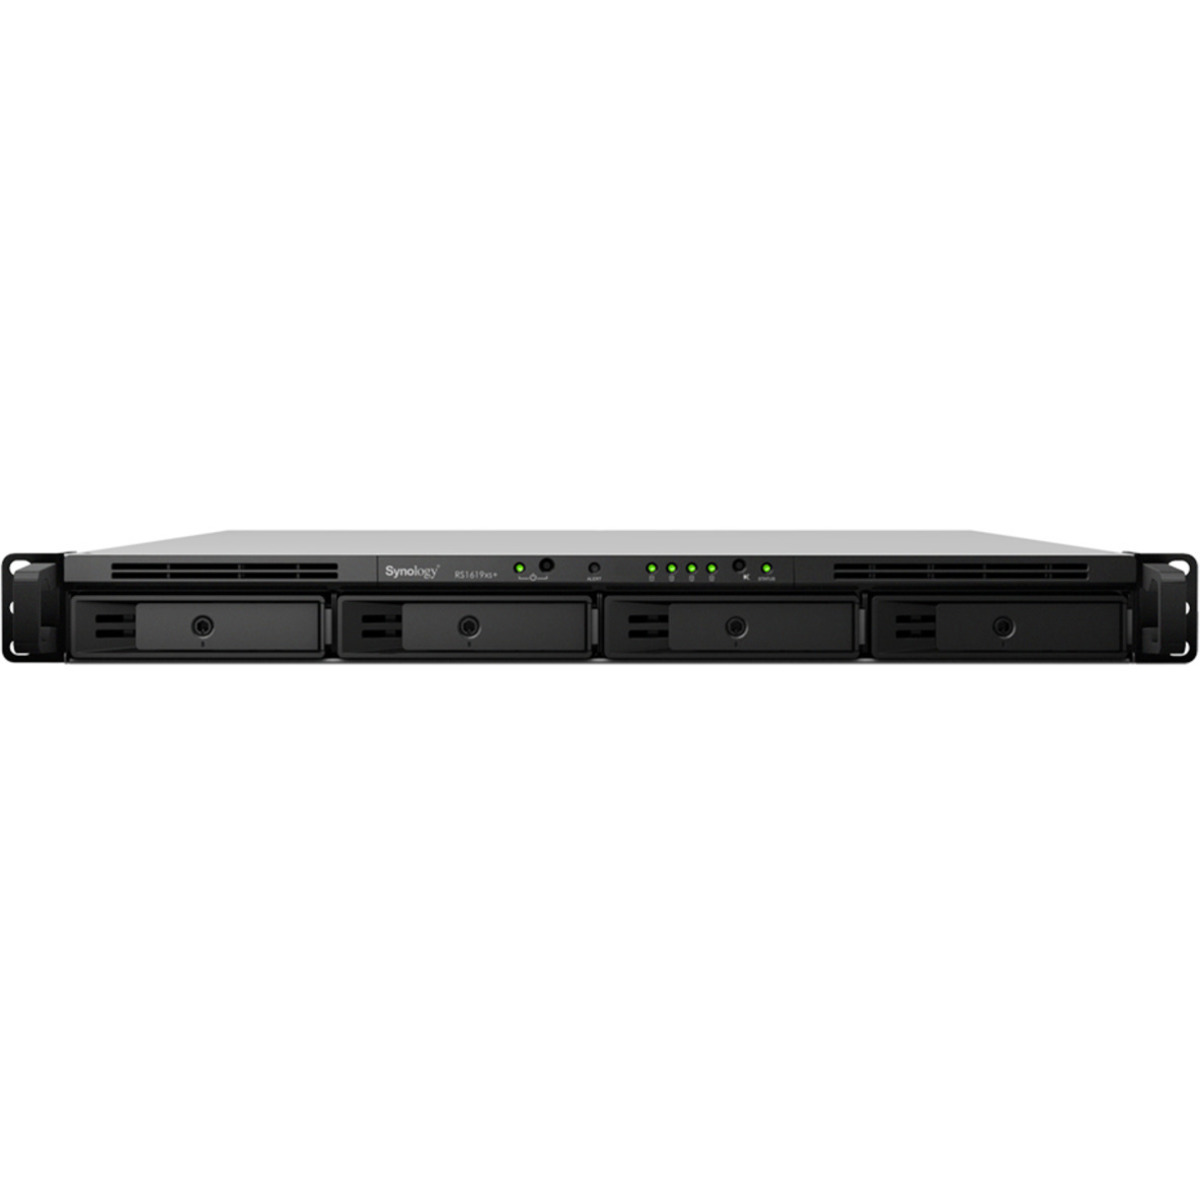 Synology RackStation RS1619xs+ 1.5tb 4-Bay RackMount Multimedia / Power User / Business NAS - Network Attached Storage Device 3x500gb Crucial MX500 CT500MX500SSD1 2.5 560/510MB/s SATA 6Gb/s SSD CONSUMER Class Drives Installed - Burn-In Tested RackStation RS1619xs+